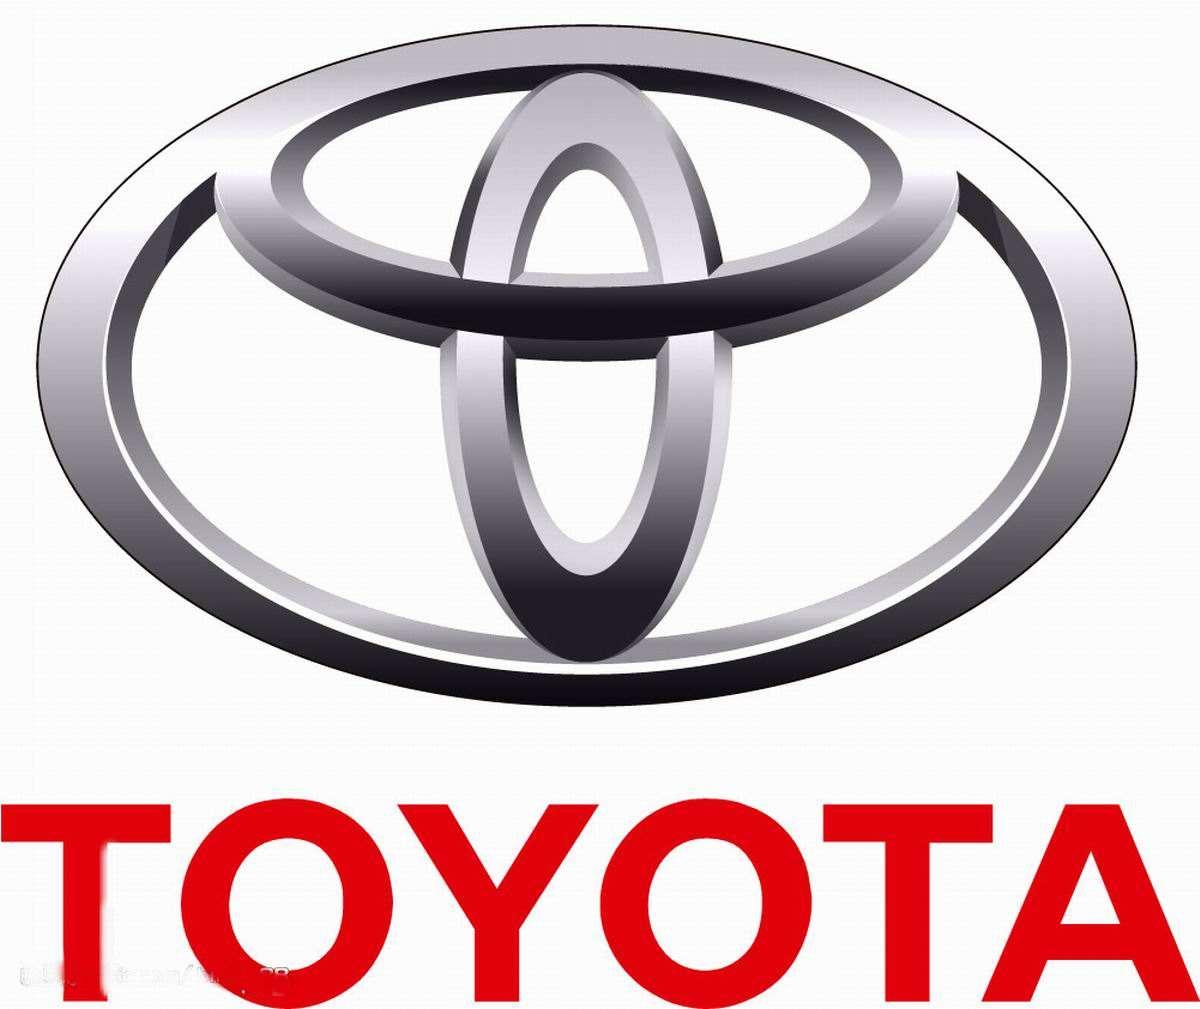 Toyota Logo Wallpapers - Wallpaper Cave